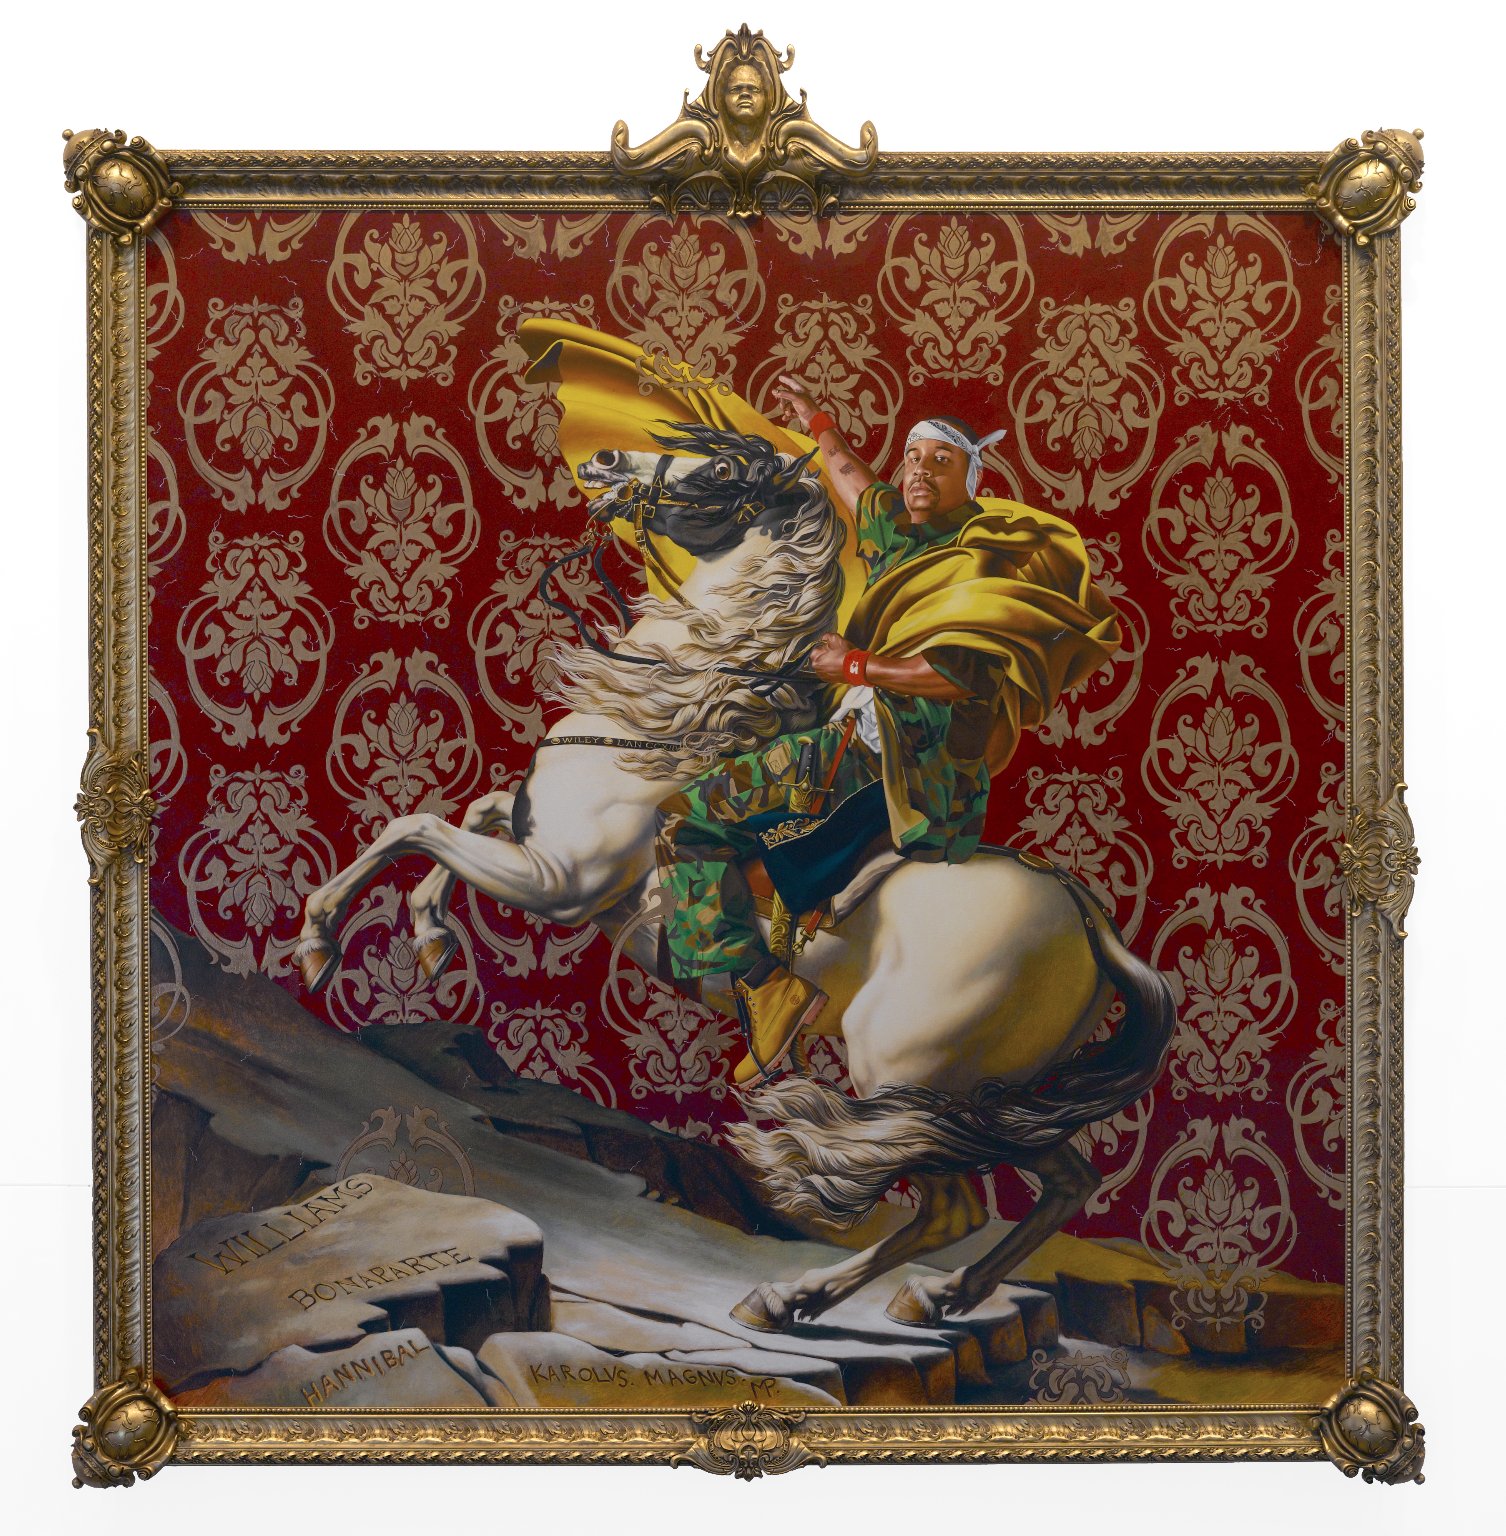 Kehinde Wiley, Napoleon Leading the Army over the Alps, 2005, oil on canvas, 274.3 x 274.3 cm (Brooklyn Museum of Art, New York) © Kehinde Wiley